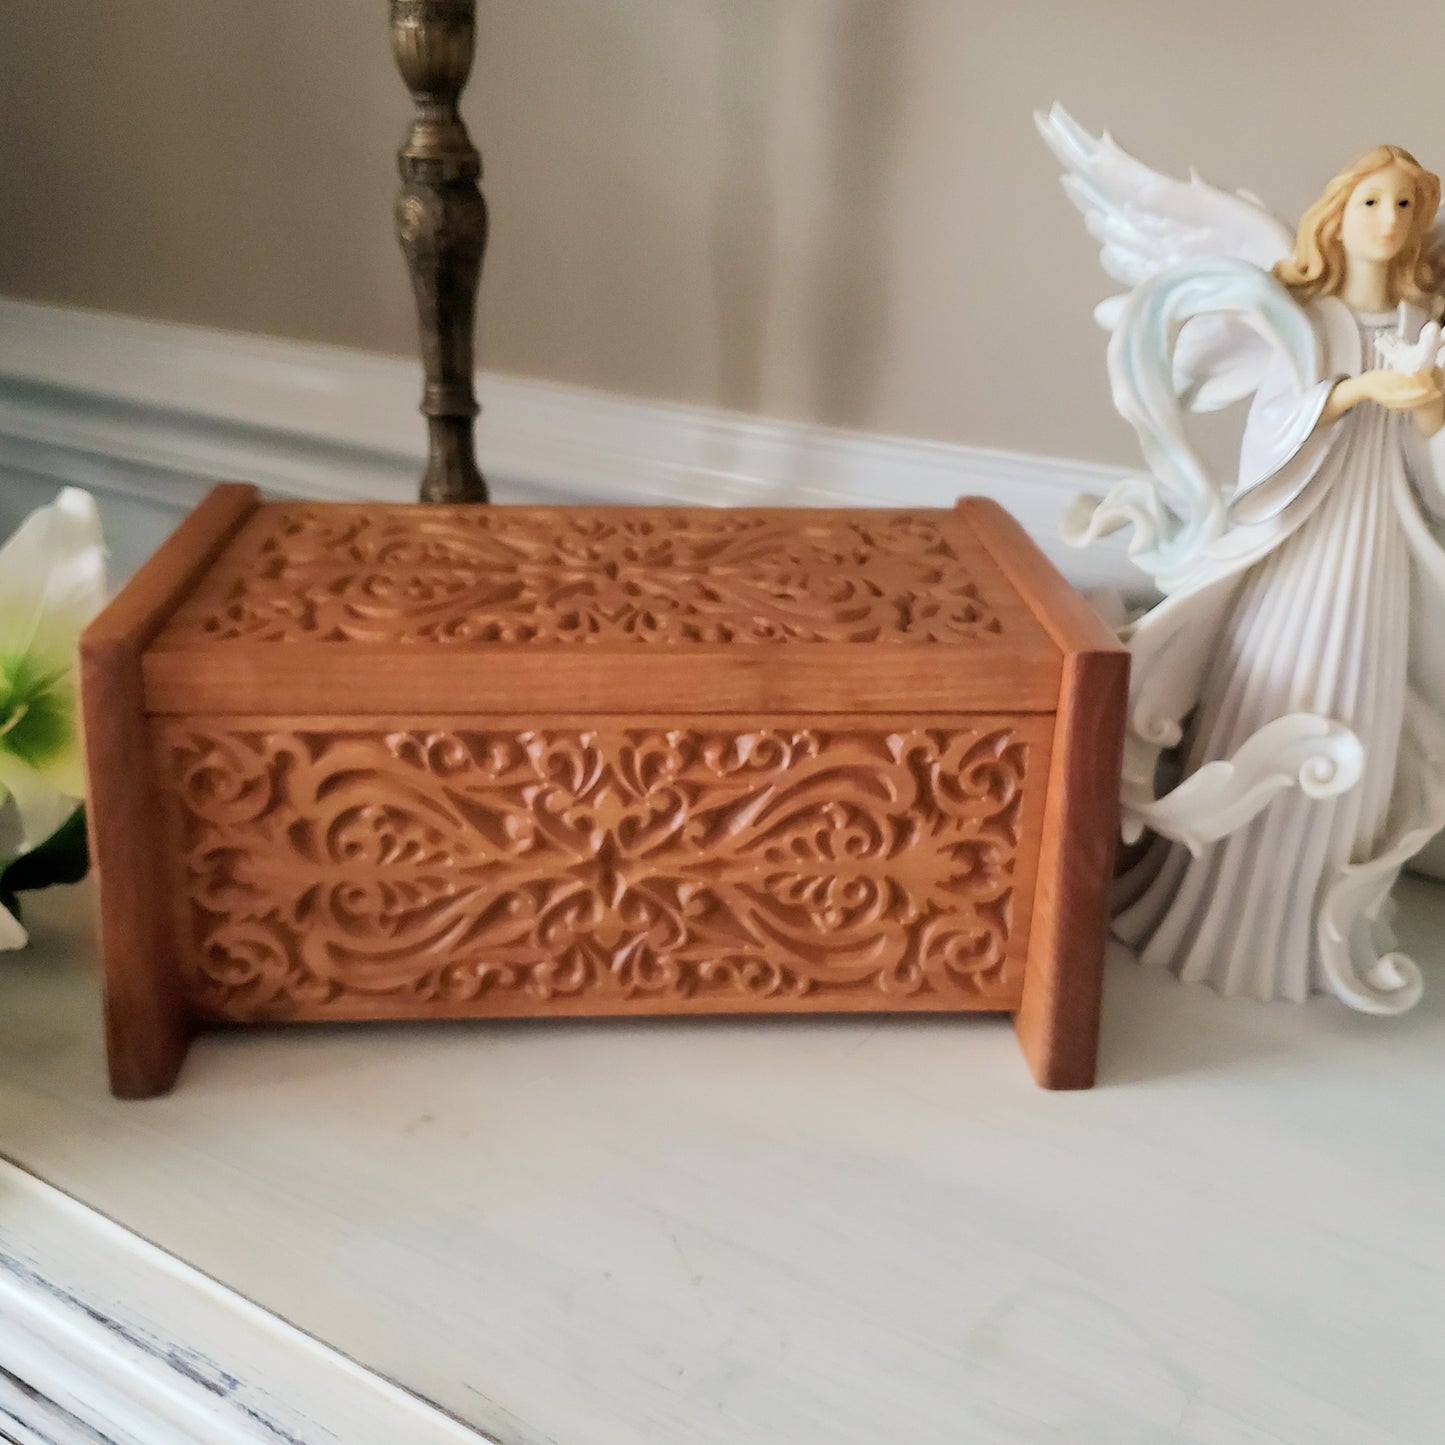 Urns for Human Ashes Handcrafted from Cherry Wood, Elegant Carved Box For Cremation Ashes Adult Light Finish